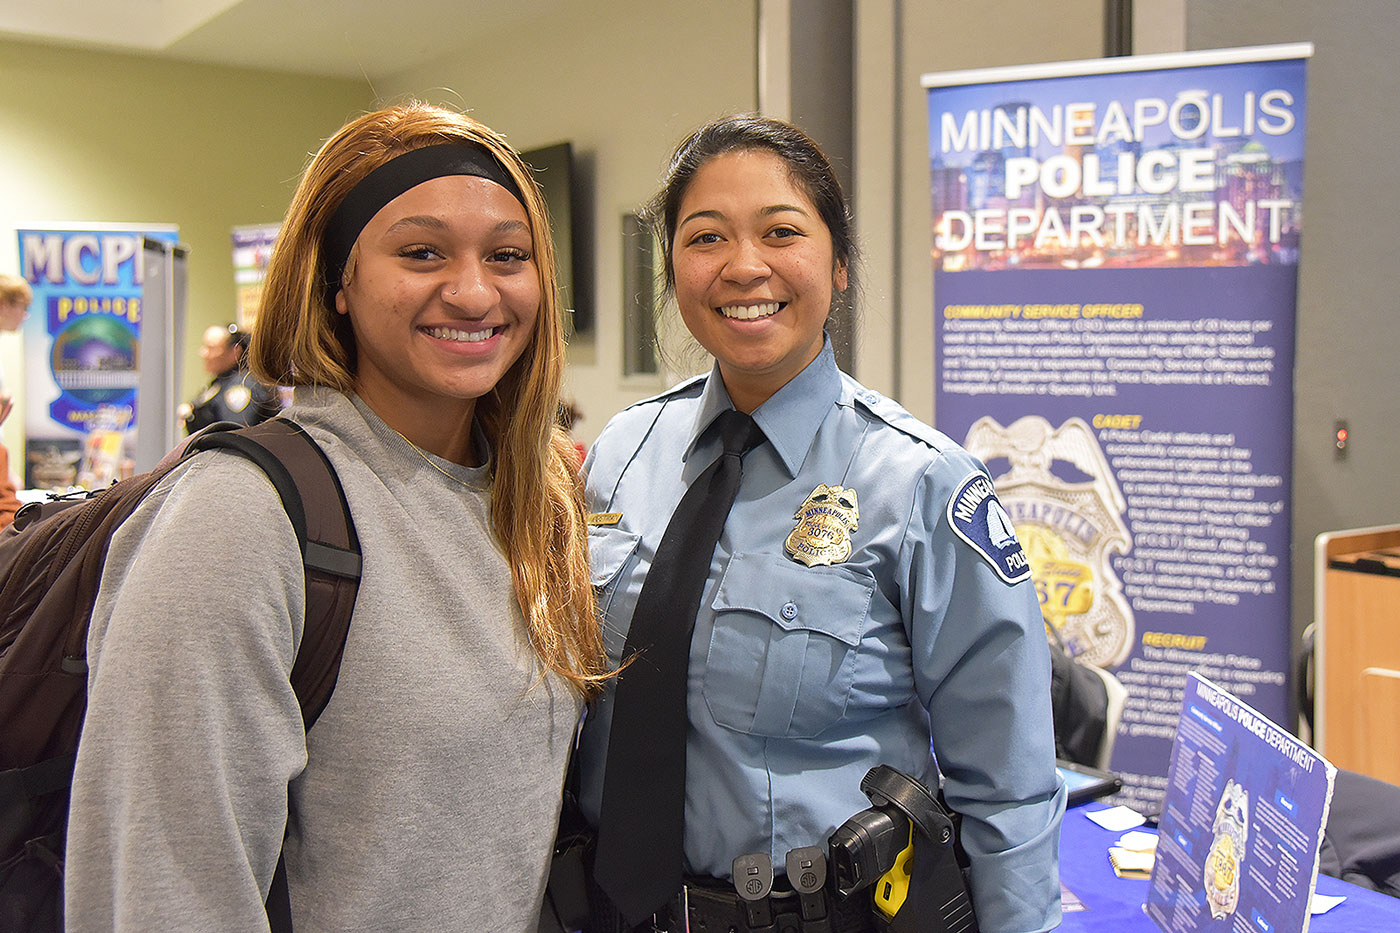 Representatives from approximately 50 criminal justice-related agencies were on hand to meet with Career Fair attendees.